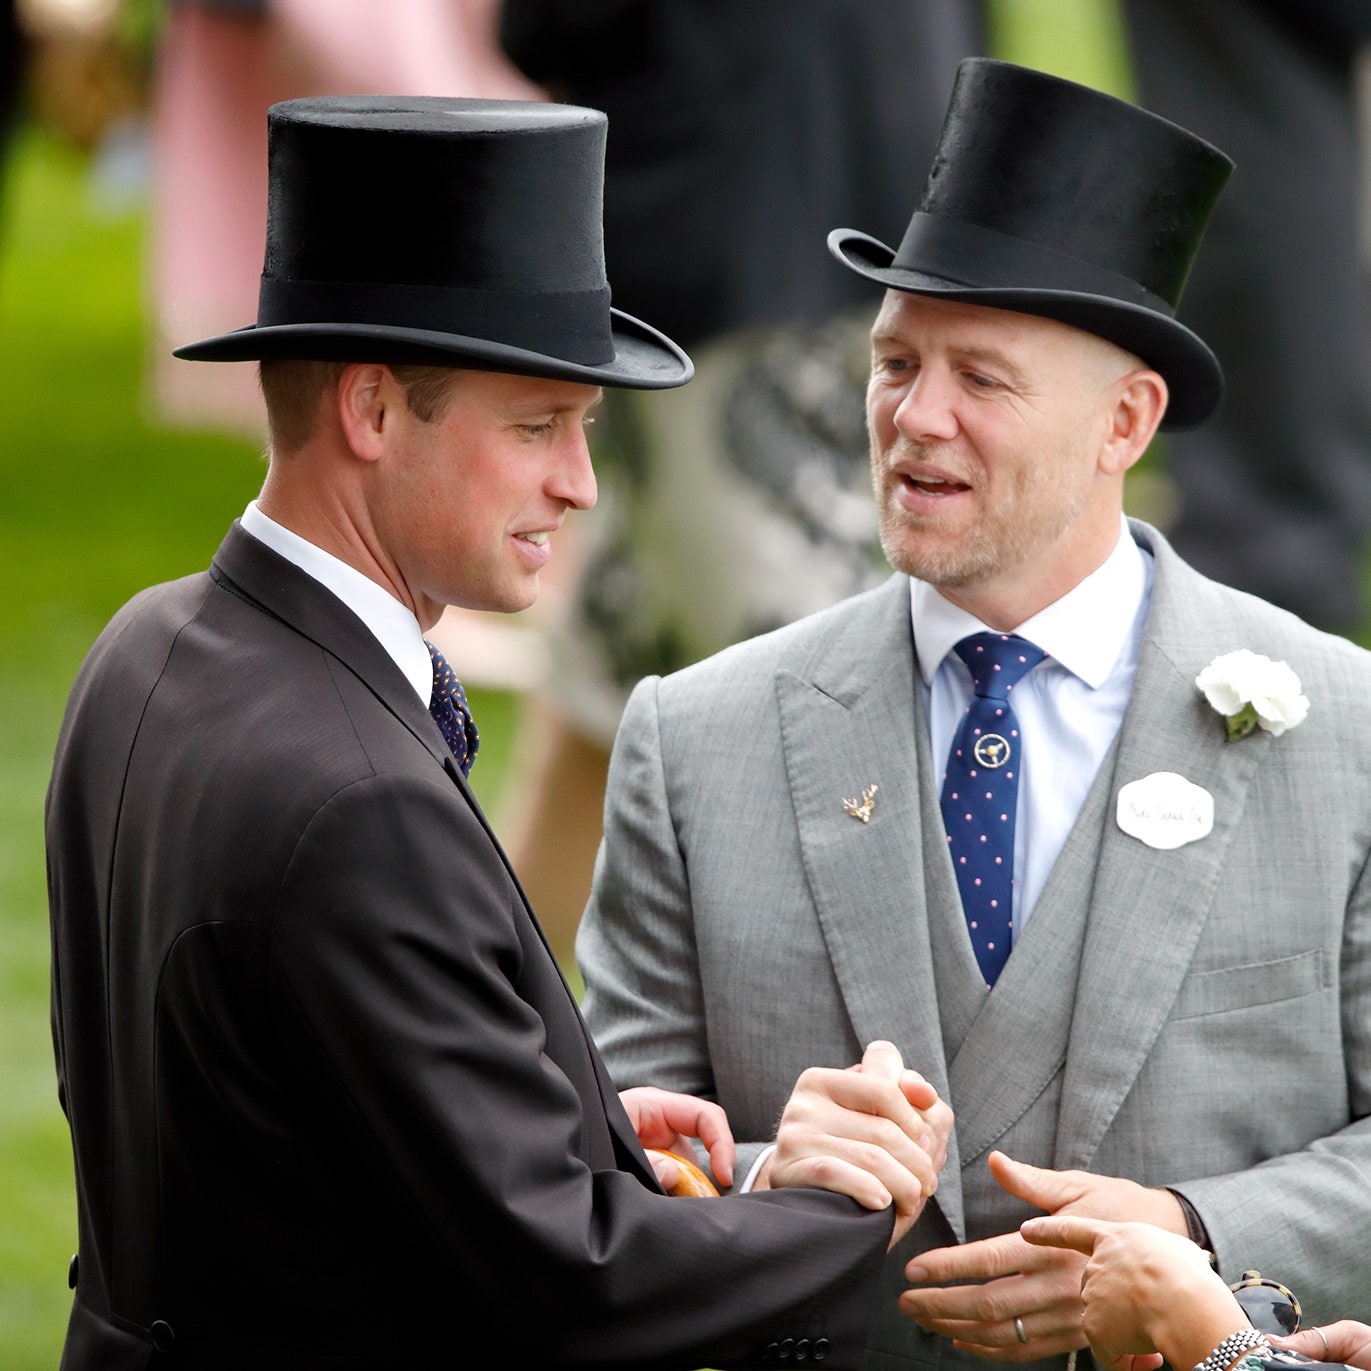 Prince William’s Embarrassing Nickname Revealed by Mike Tindall